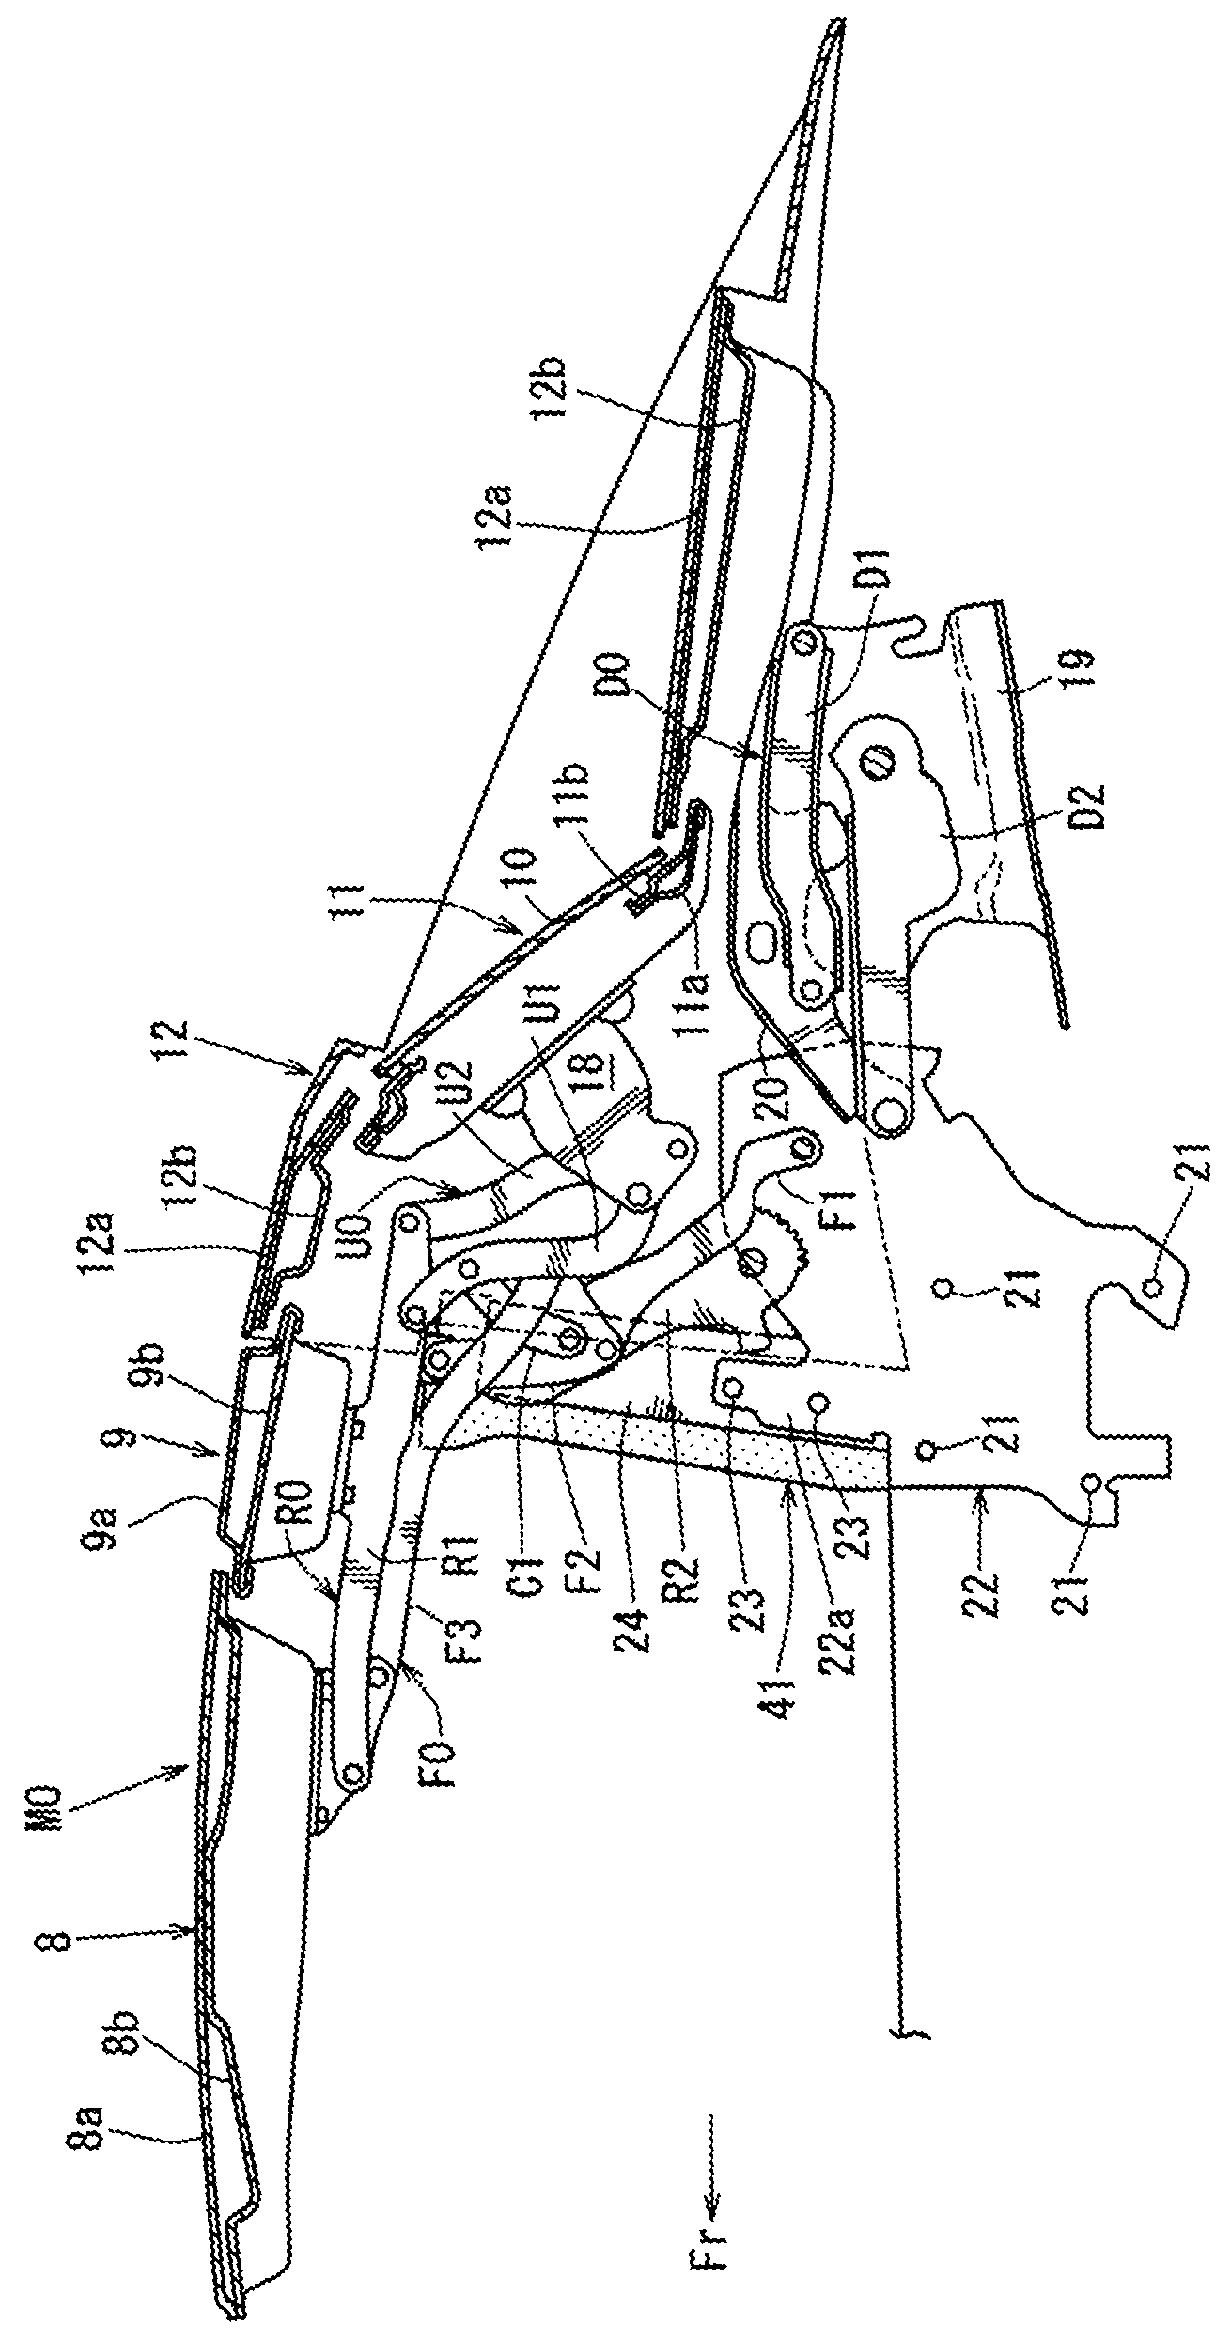 Seal structure of automotive vehicle with storing-type roof